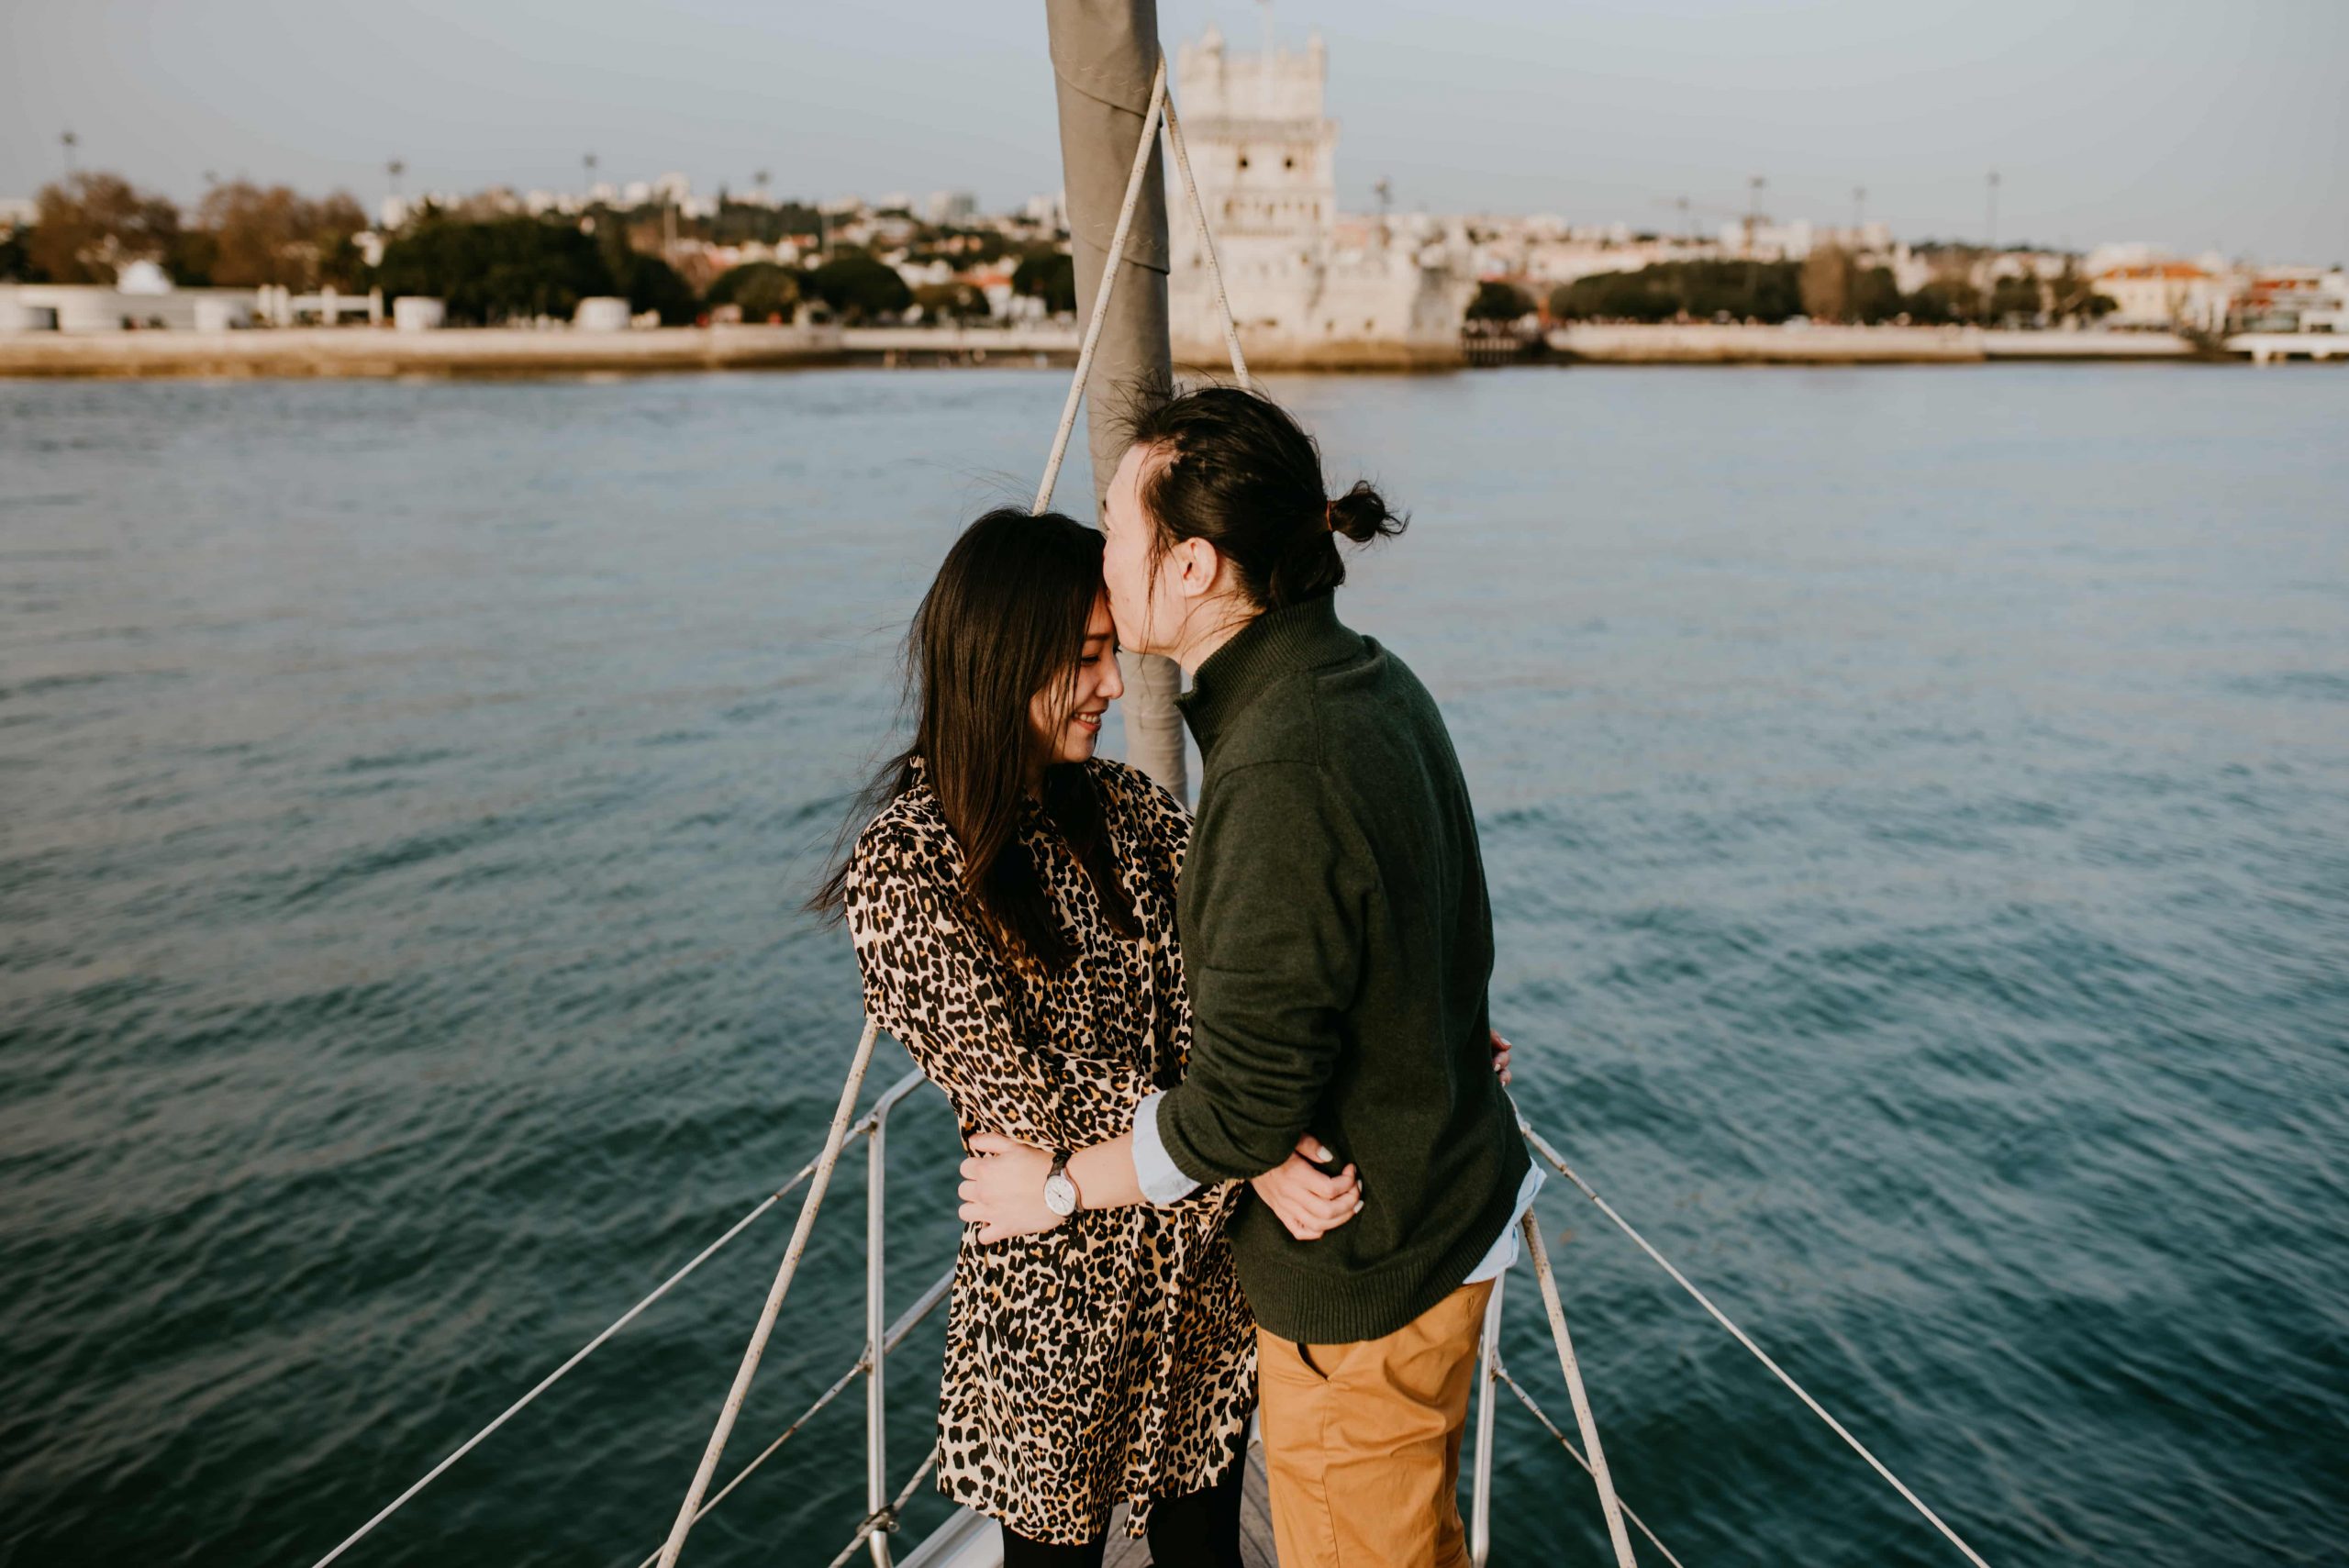 Wedding proposal on a boat in Tagus River